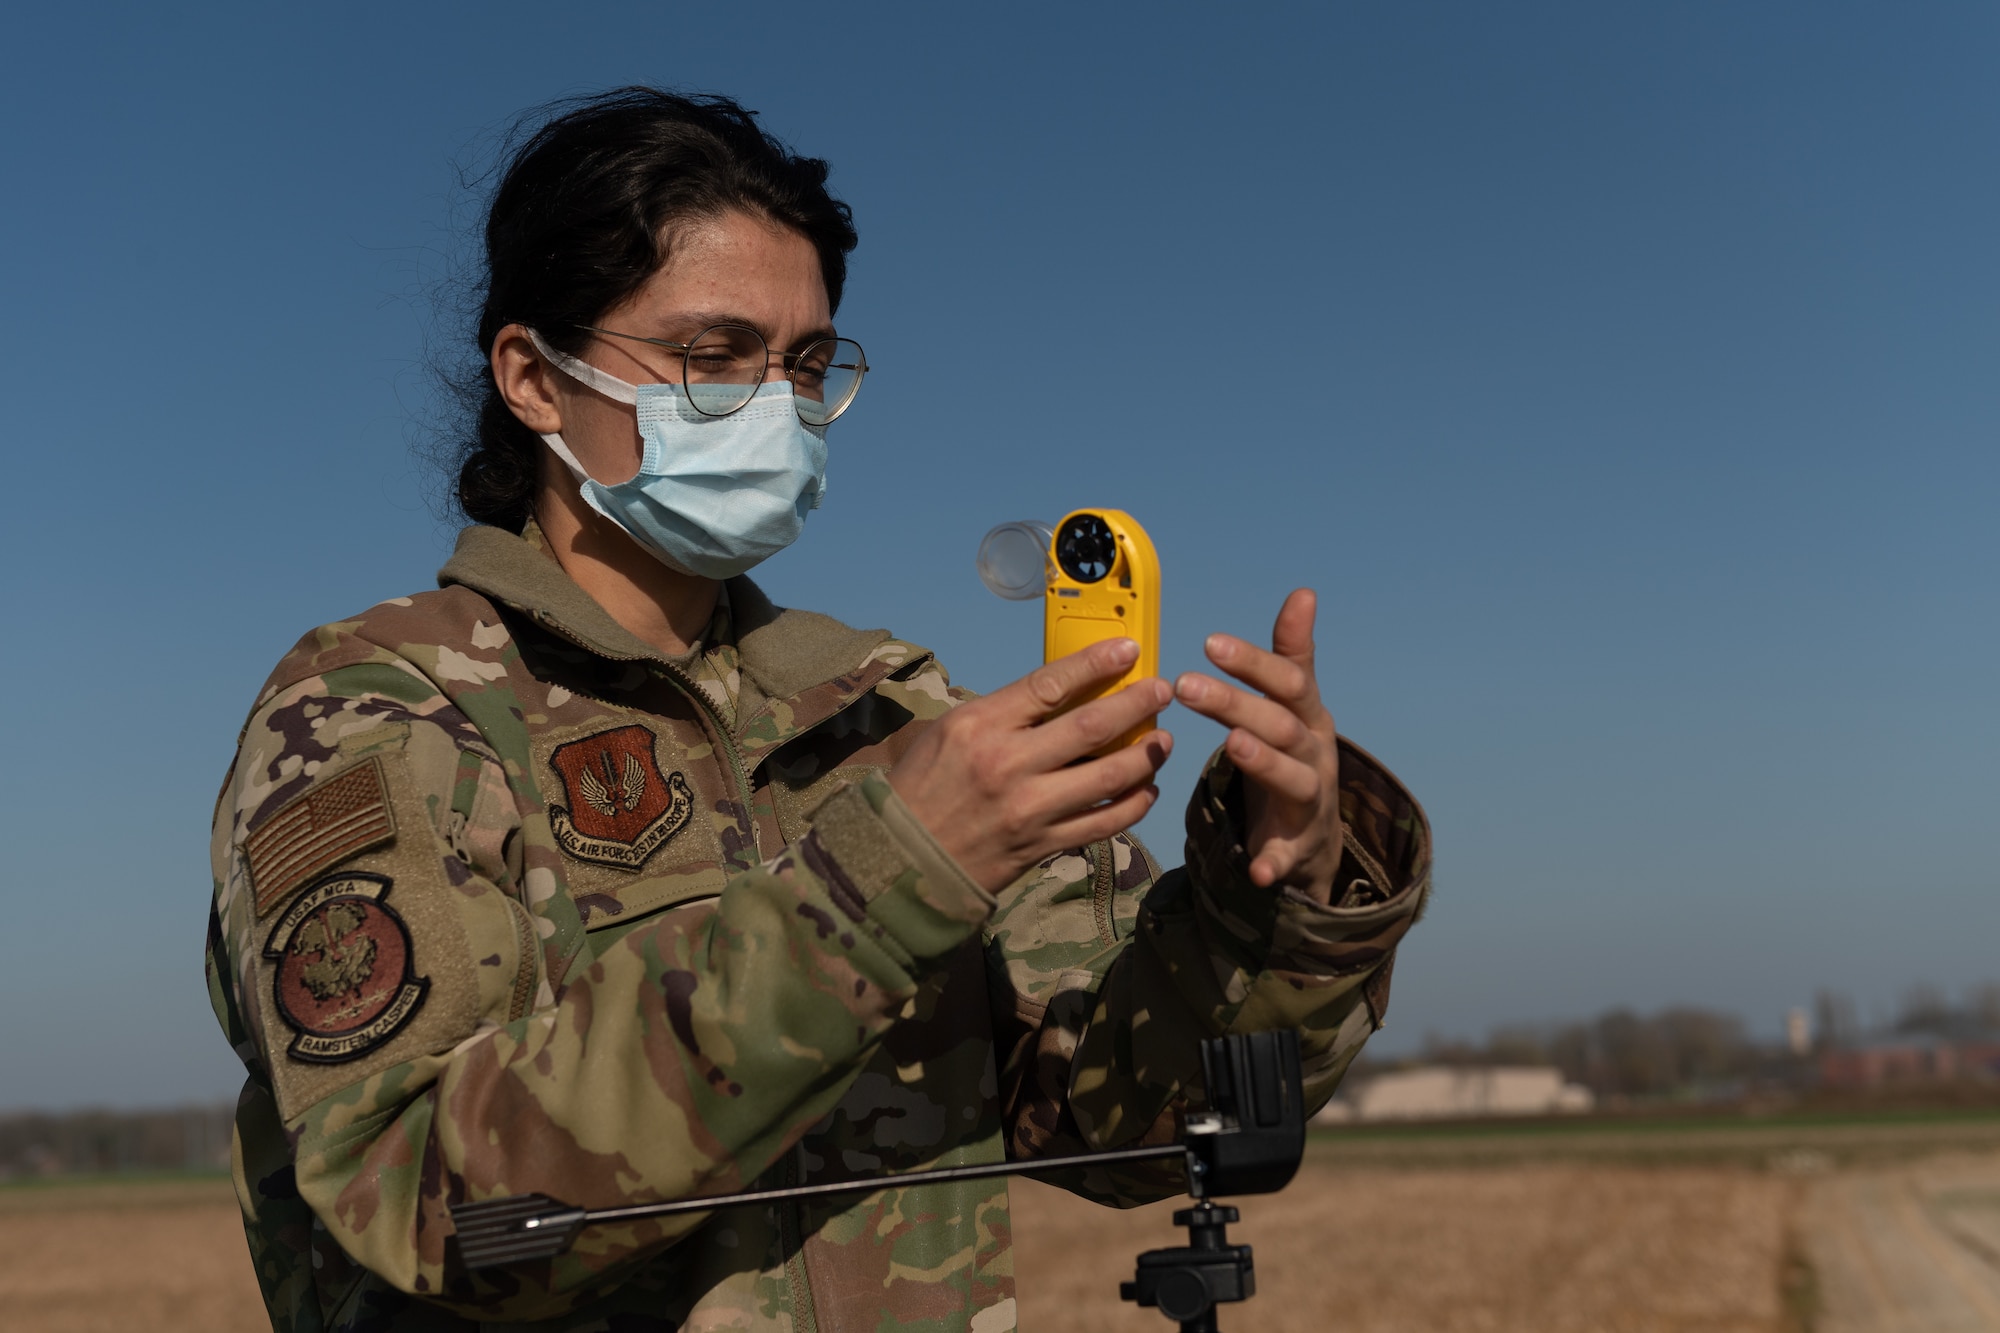 Airman holding wind measuring instrument.